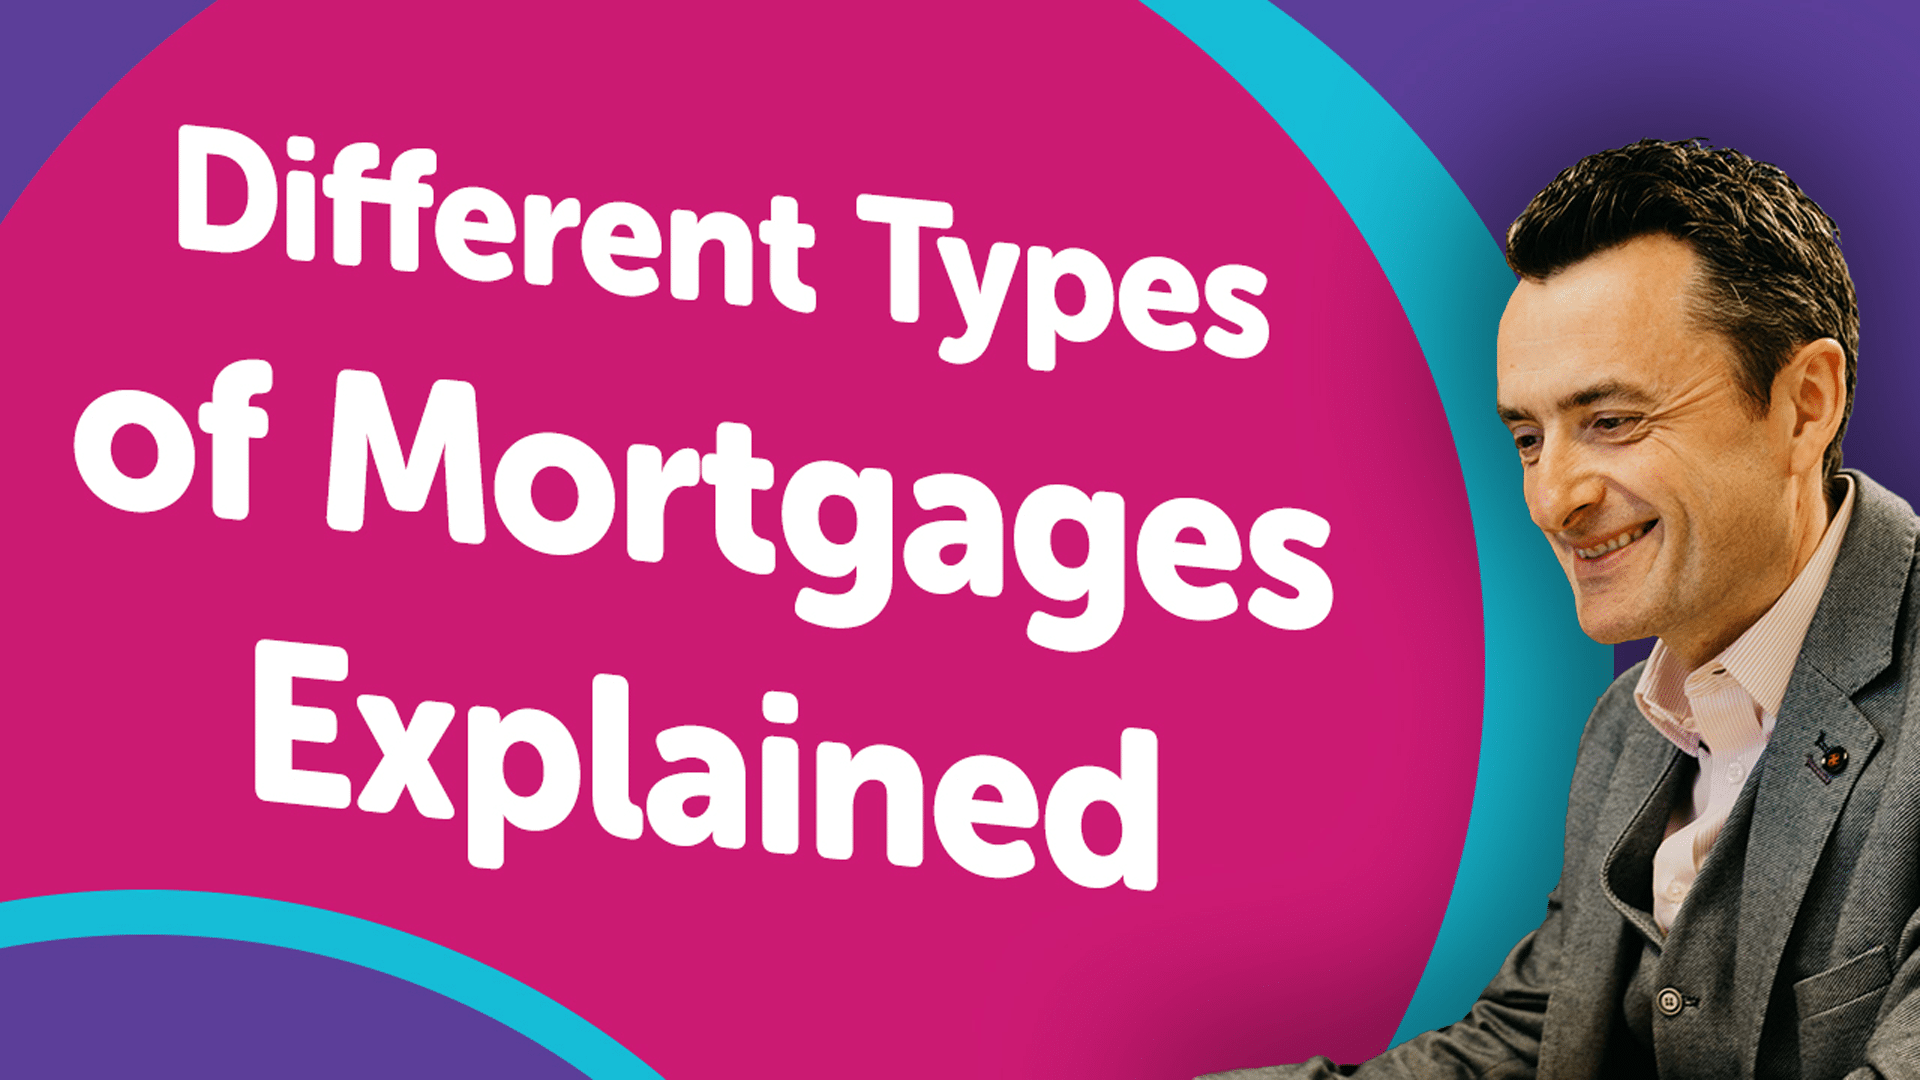 The Different Types of Mortgages in Essex Explained